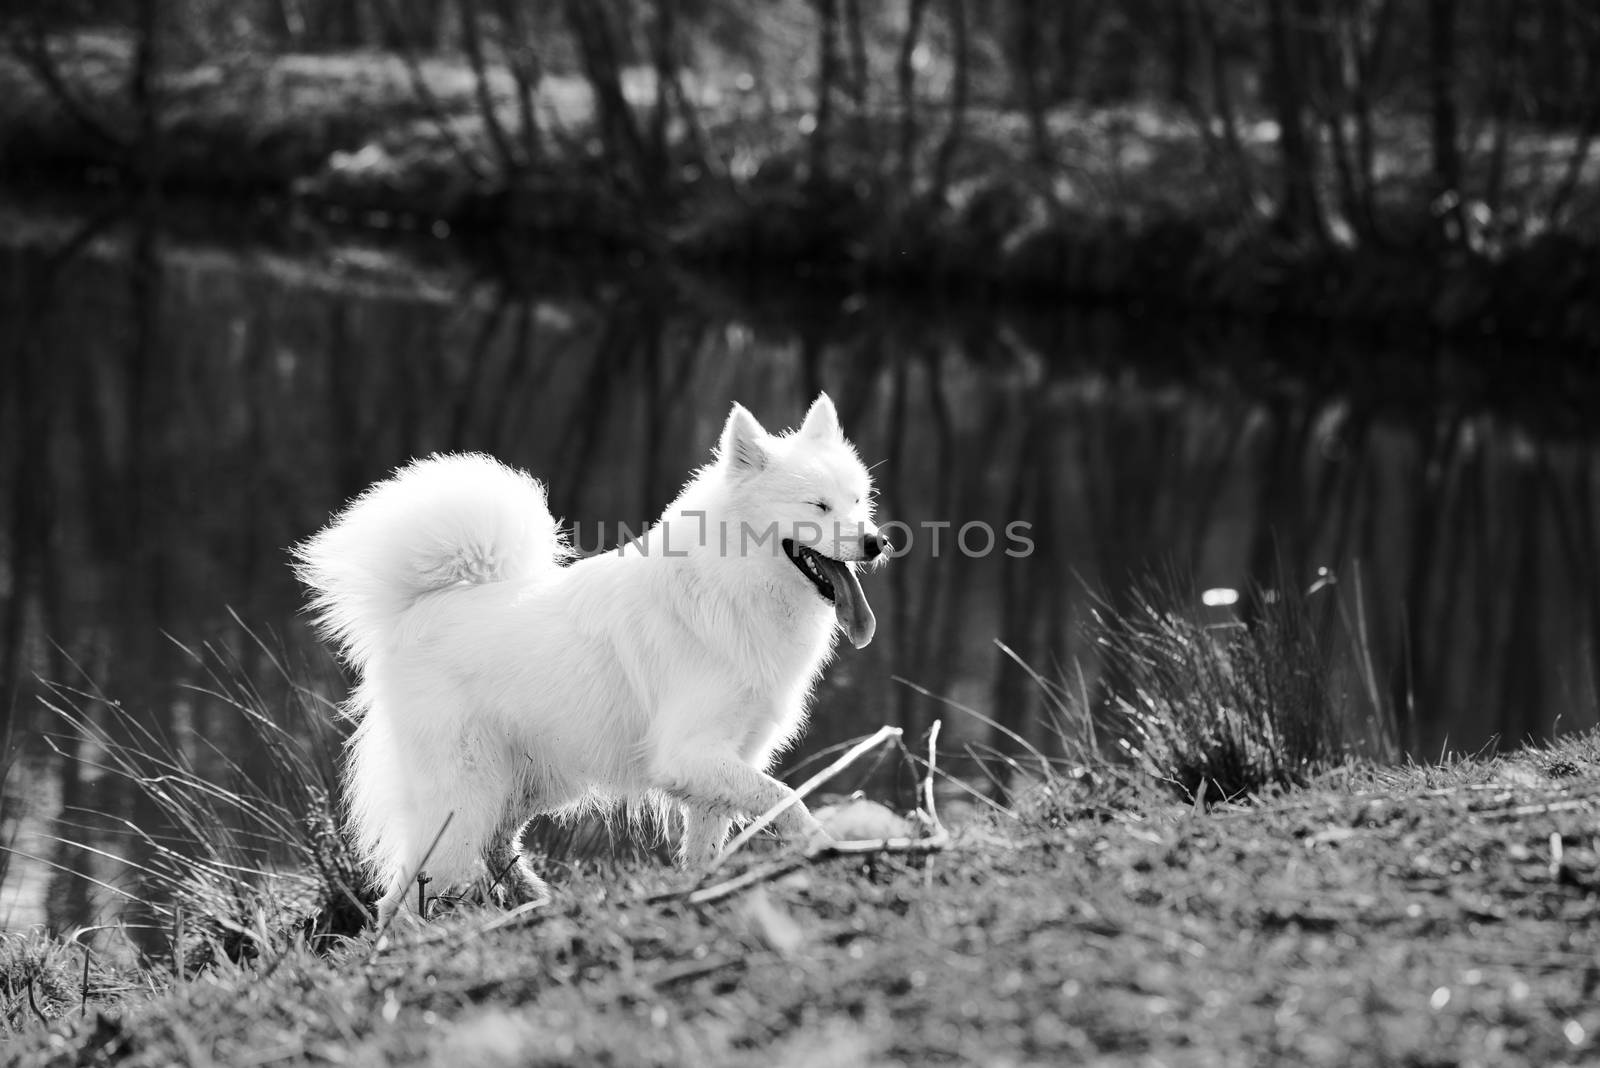 Cute, fluffy white Samoyed dog by a pond at a dog park by Pendleton